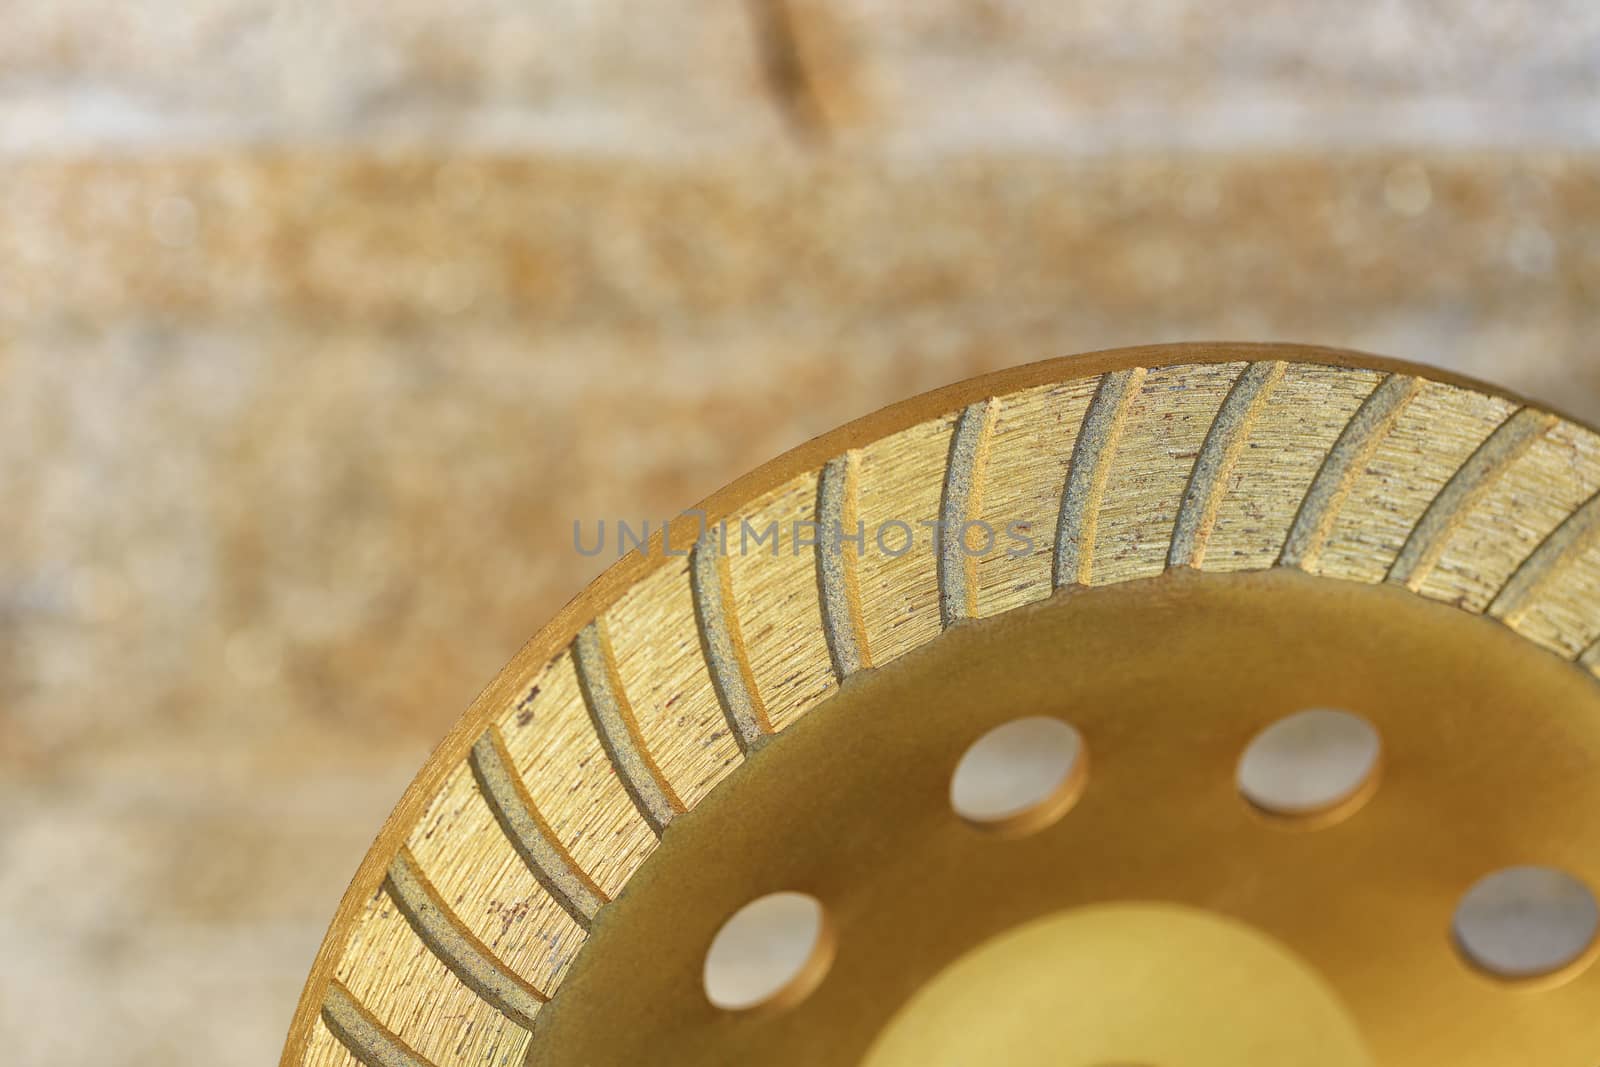 Part of the diamond grinding wheel on background an orange-golden sandstone wall. by Sergii